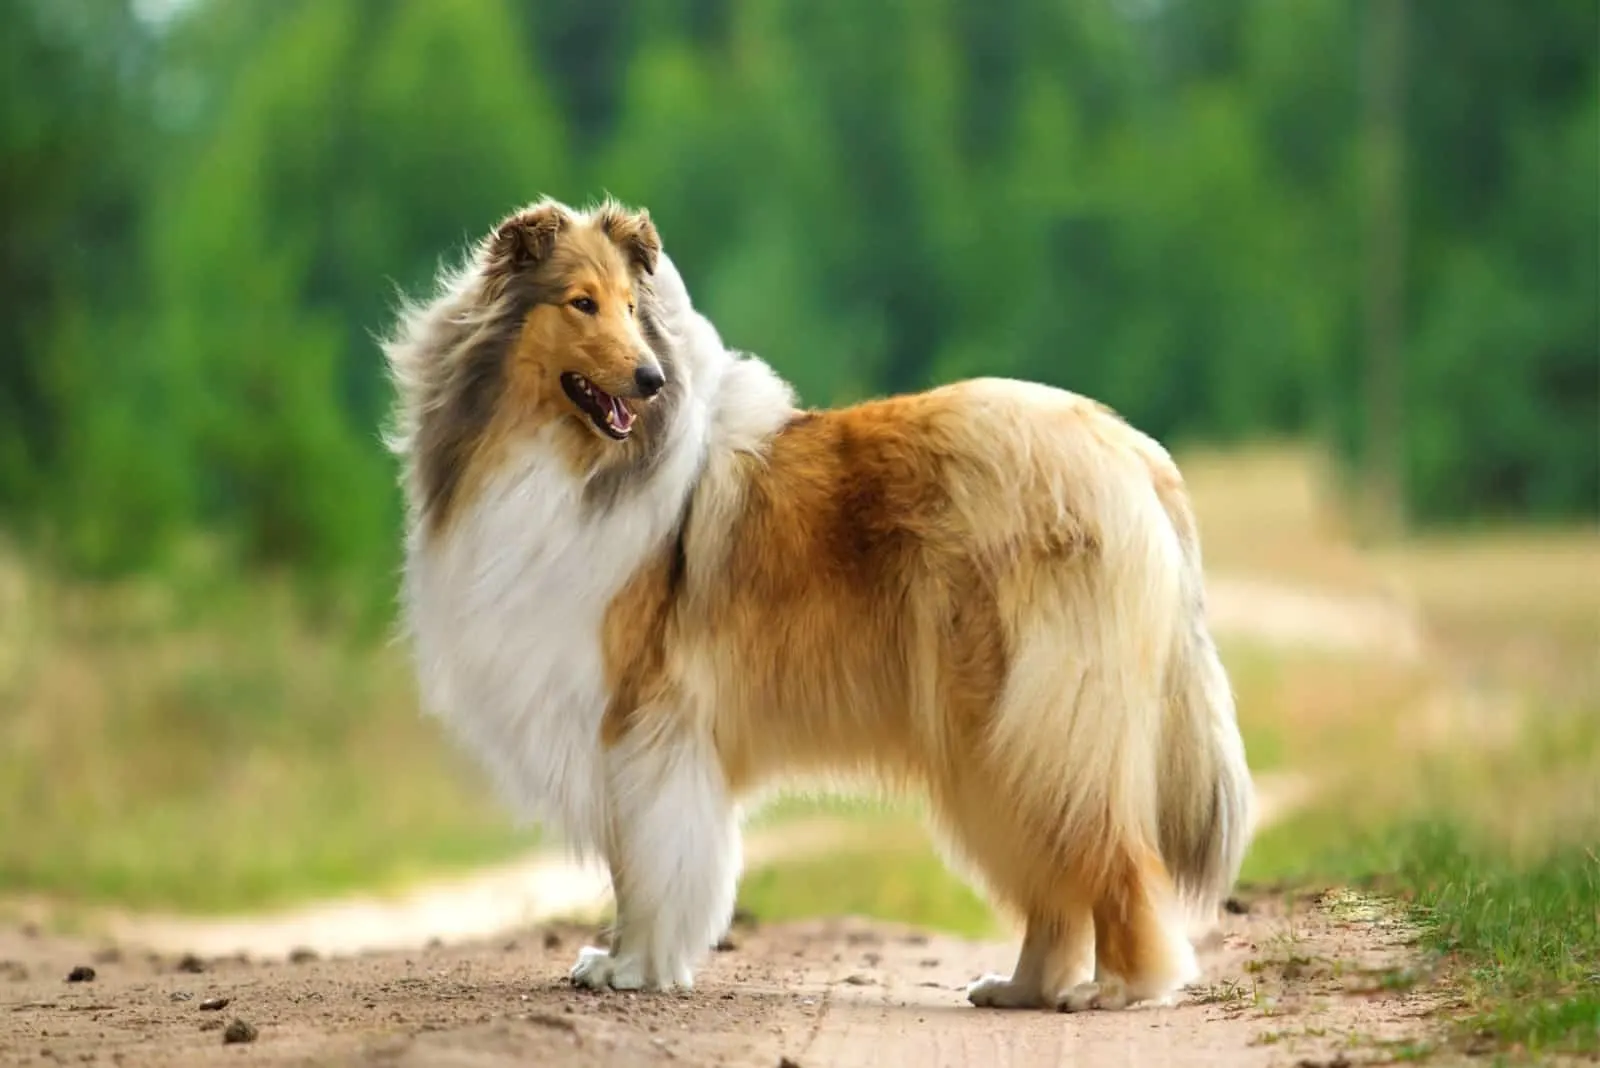 Rough Collie stands and looks behind him